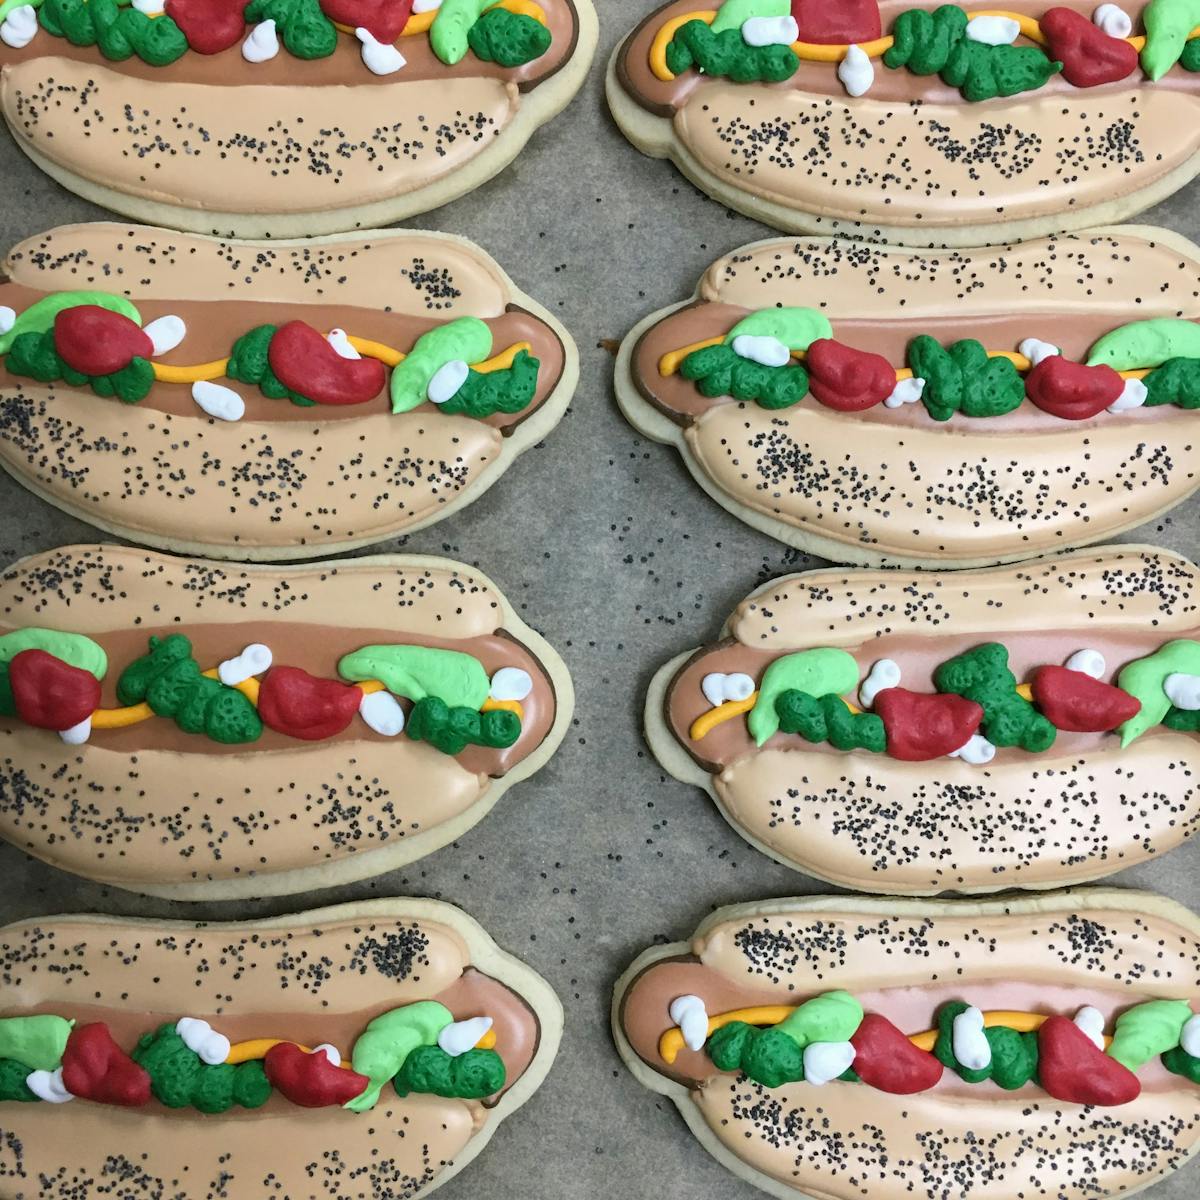 hot dog shaped cookies